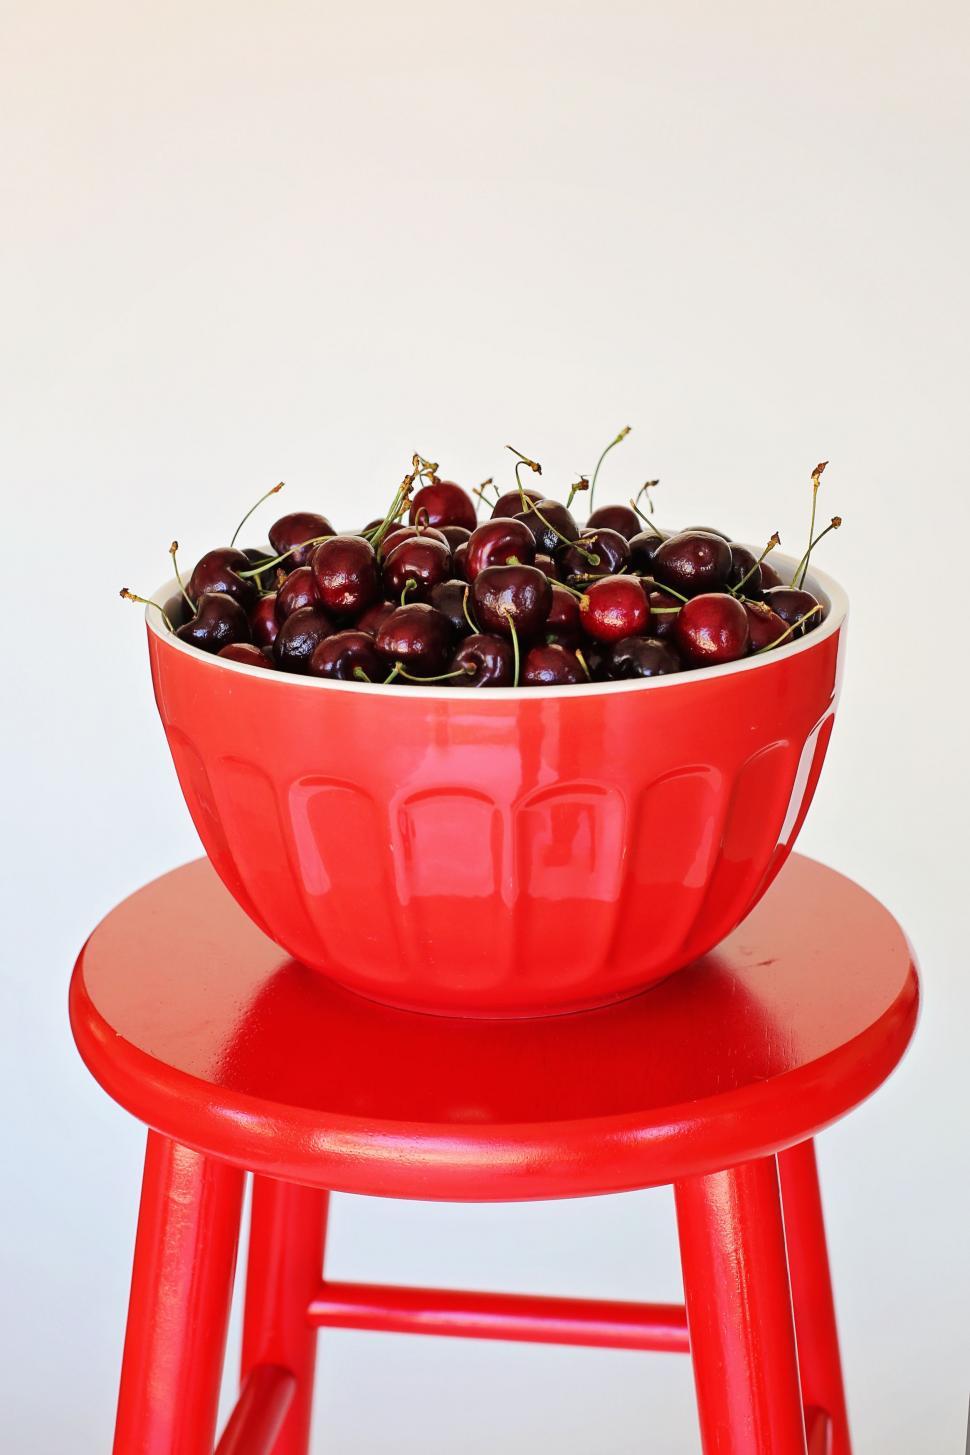 Free Image of Red Cherries in bowl  